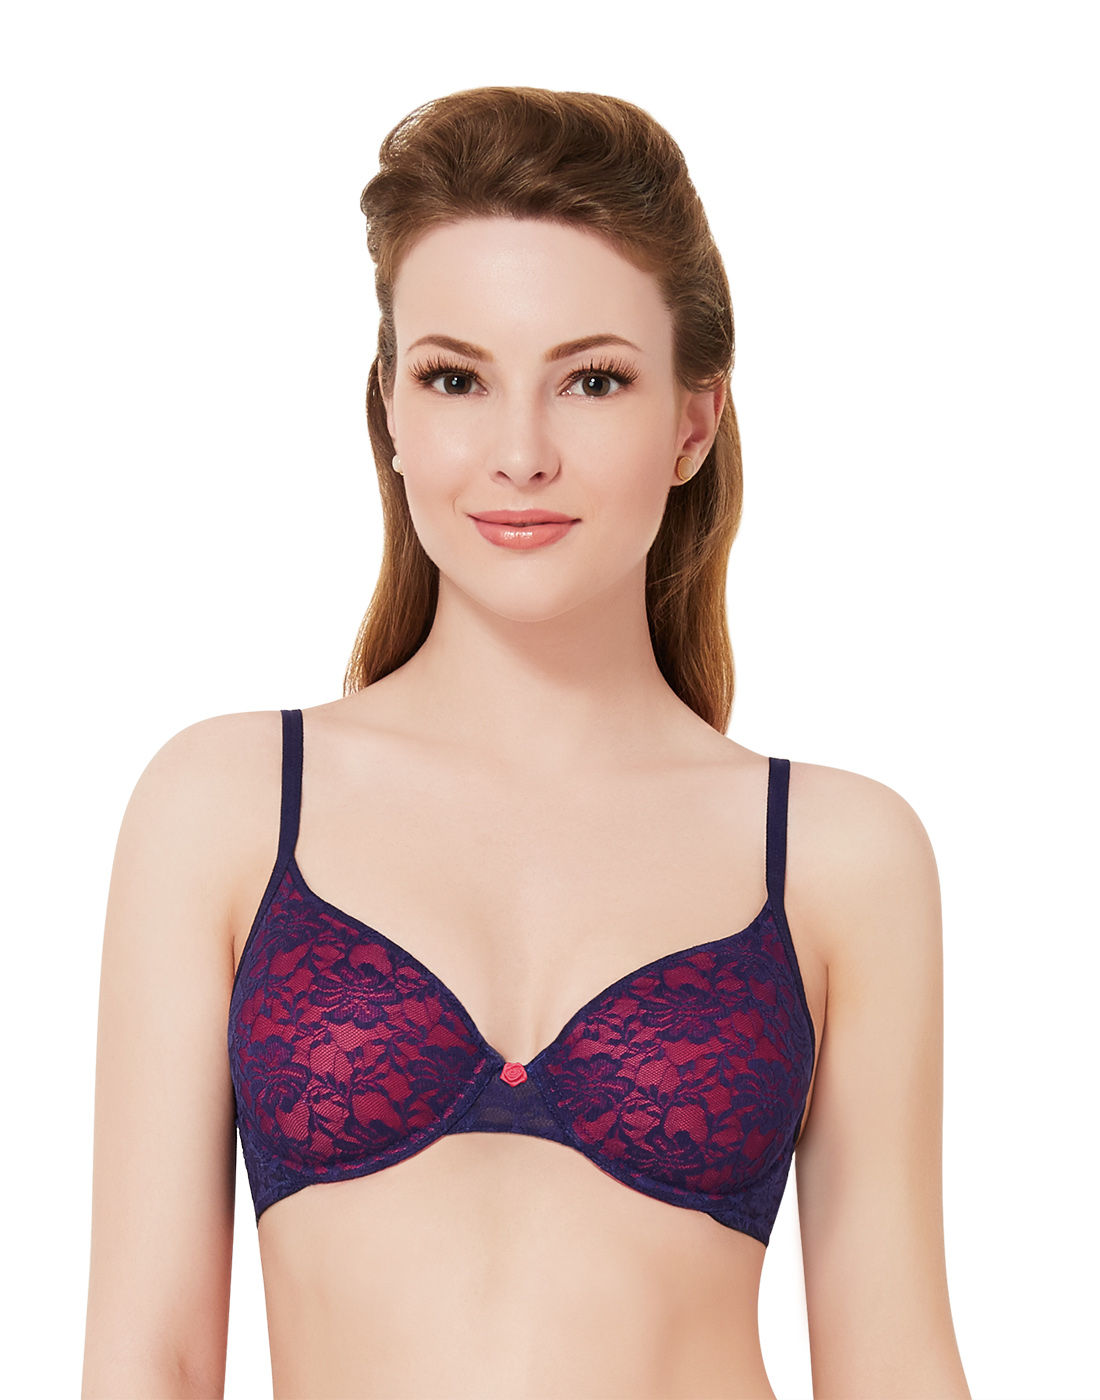 Amante Floral Romance Padded Wired Neon Pink and Blue T-Shirt Bra (38C)